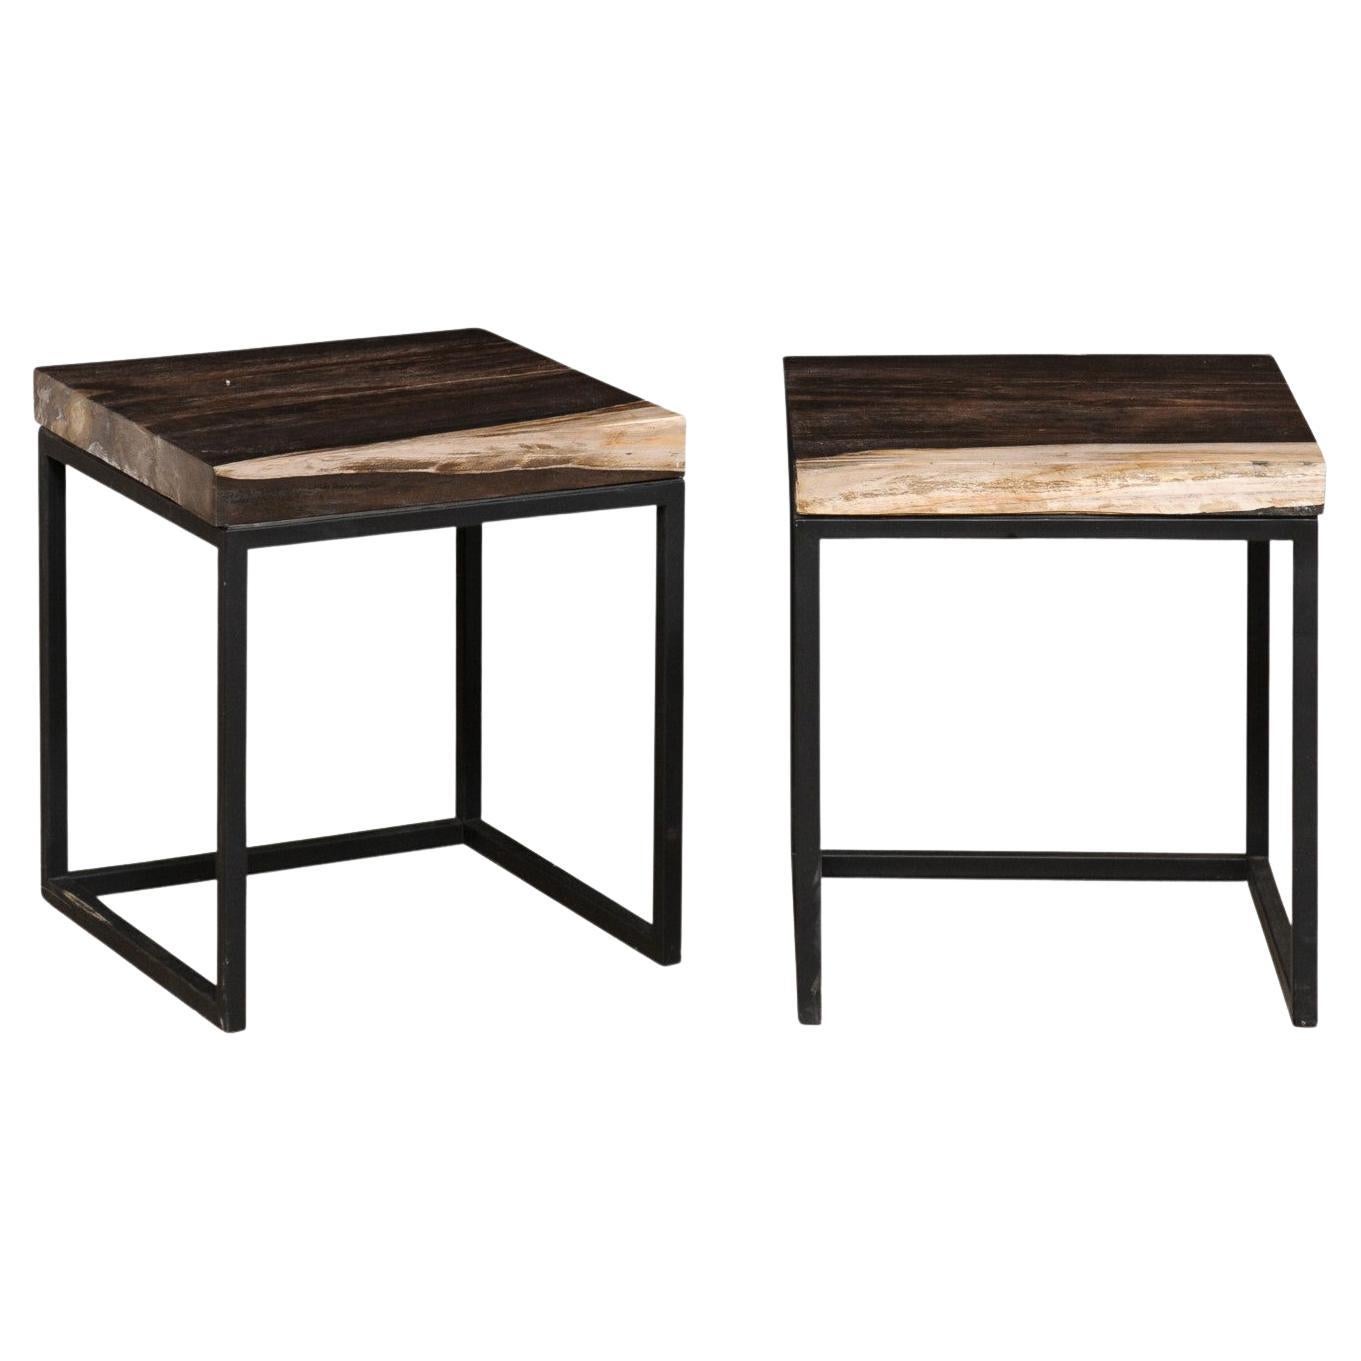 Pair of Petrified Wood Top Side Tables on Custom Iron Bases, Charcoal/Beige Tops